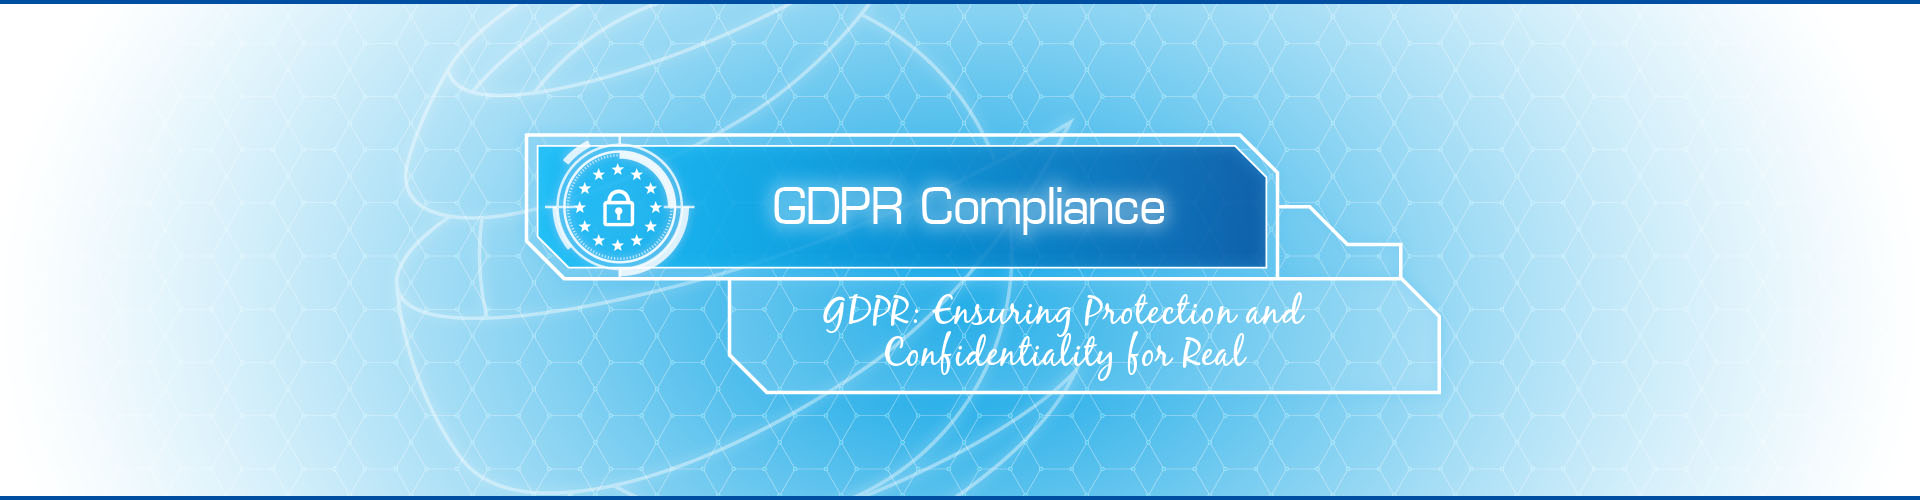 GDPR Compliance for Website and Companies